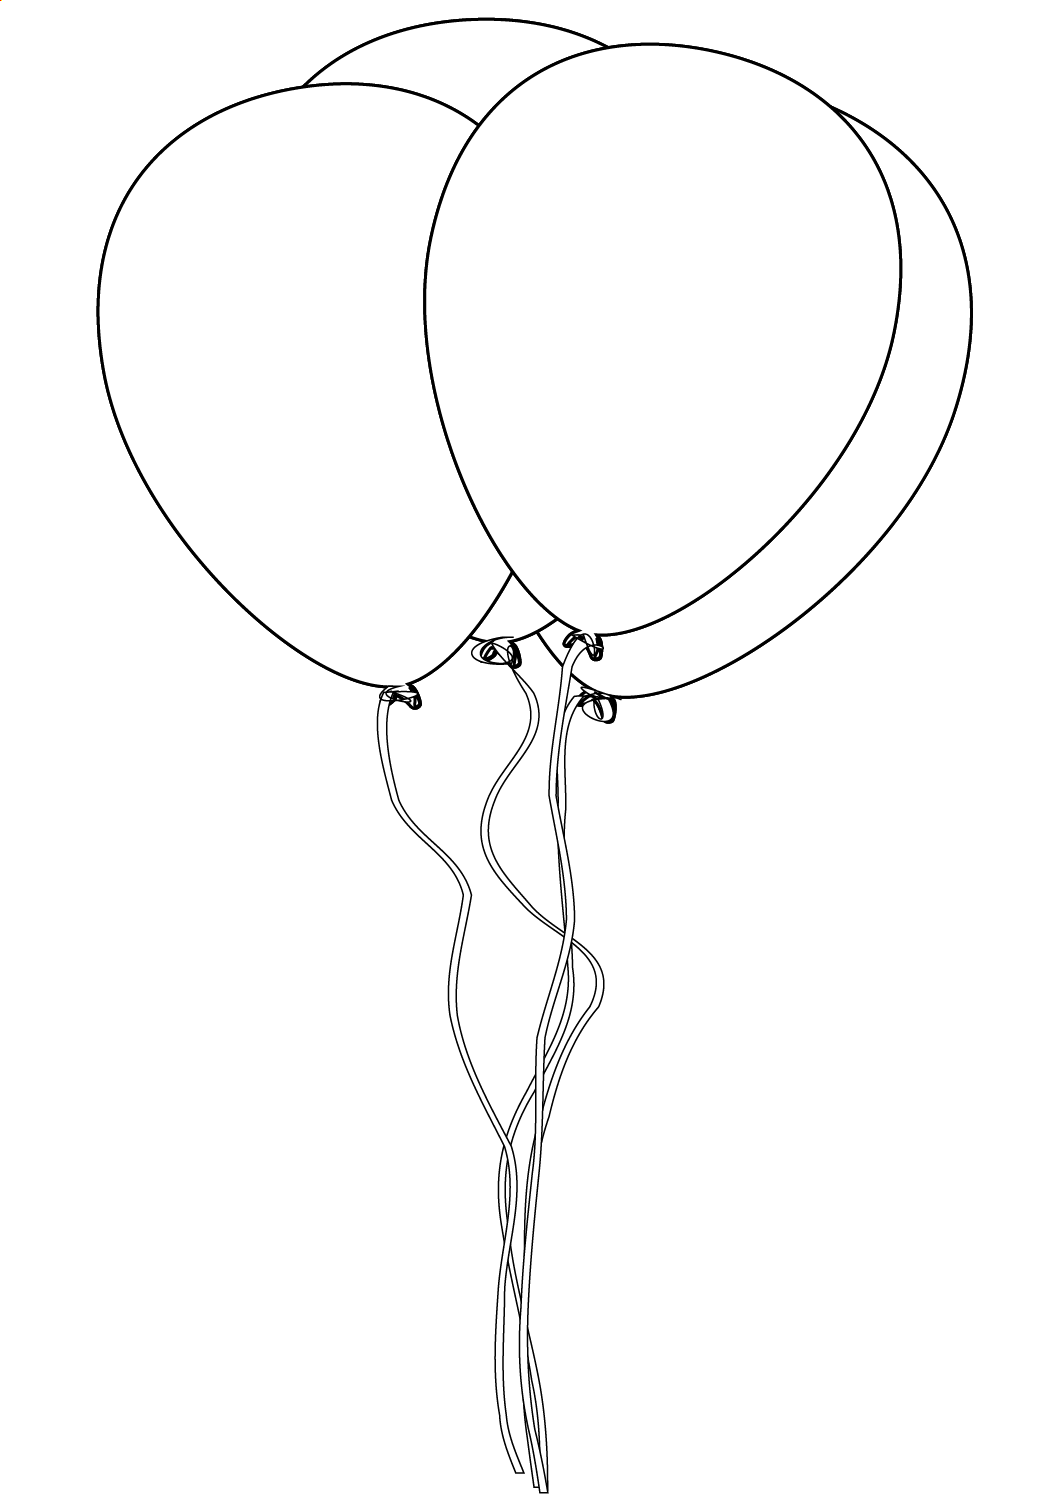 New Four Balloons Coloring